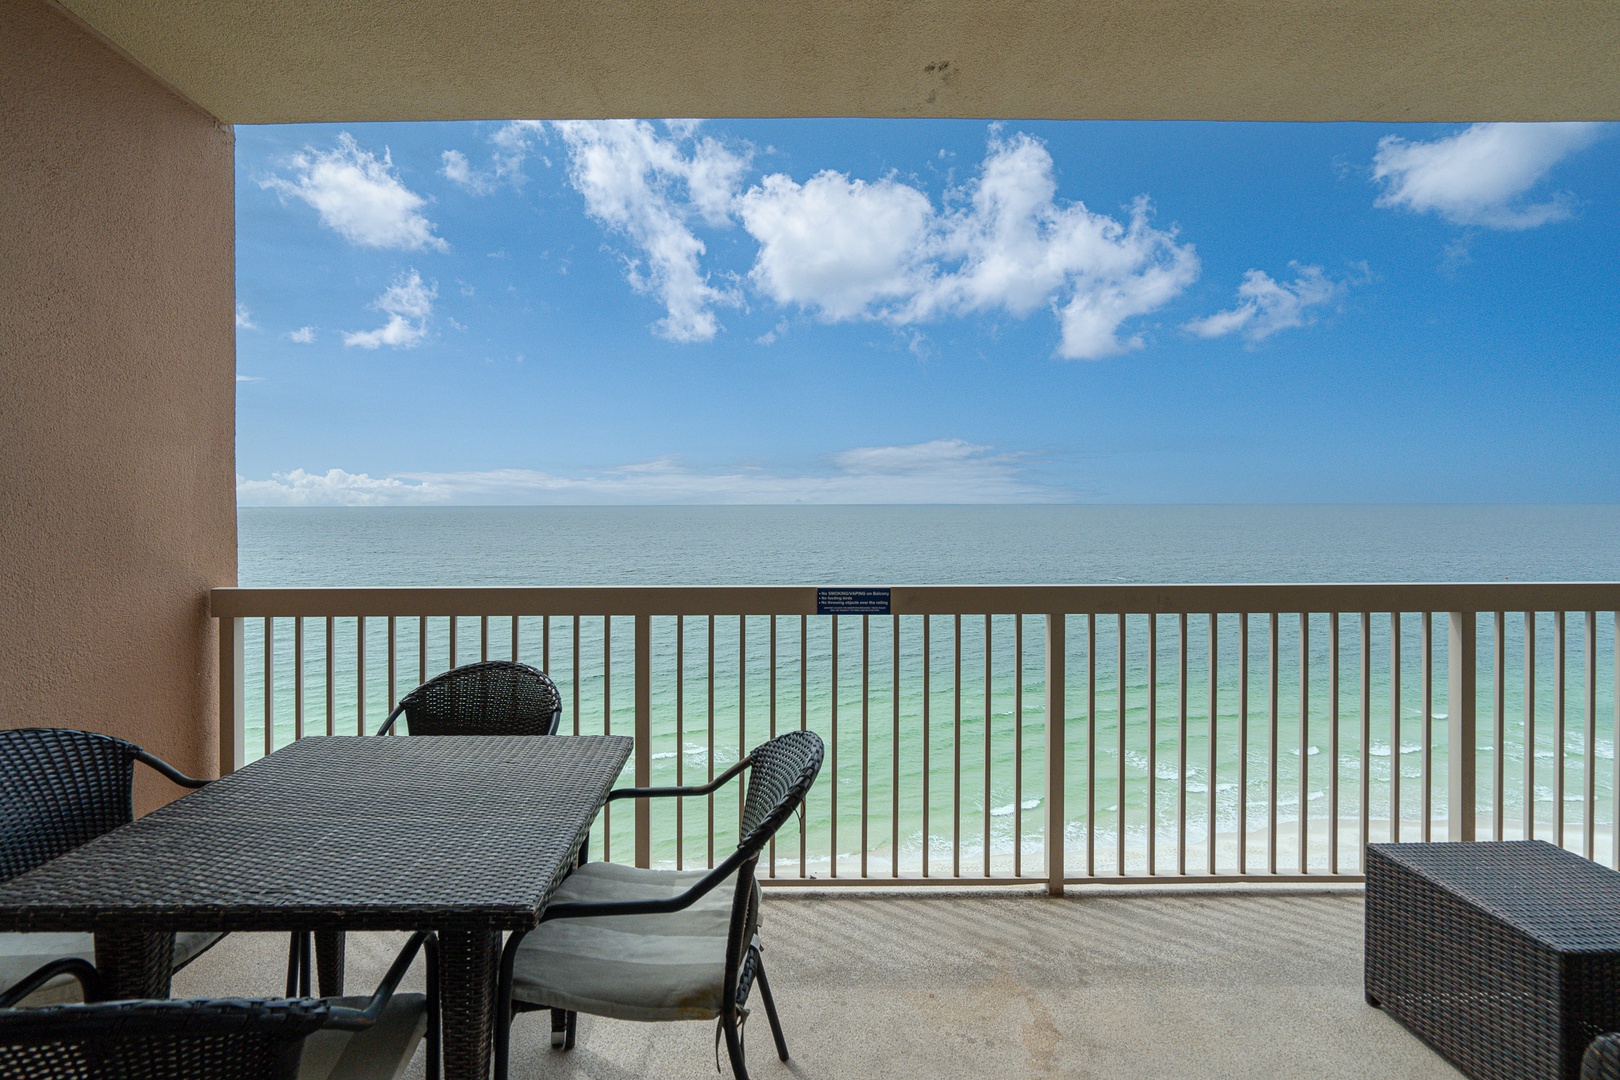 Kick back & relax or dine alfresco on the ocean-view balcony